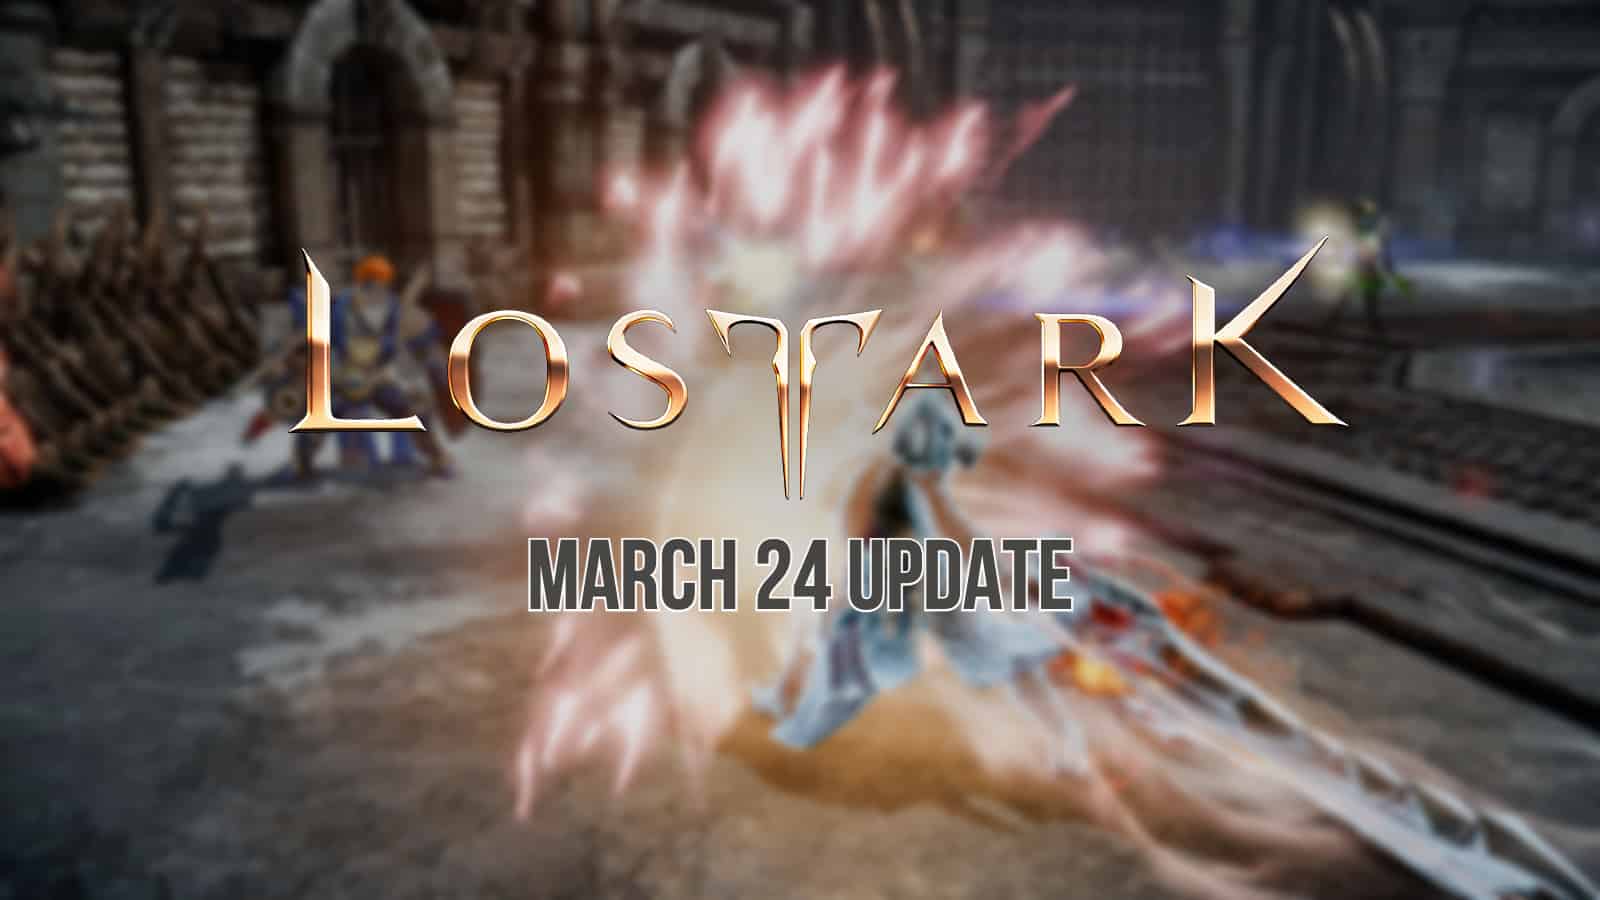 lost ark march 24 update image